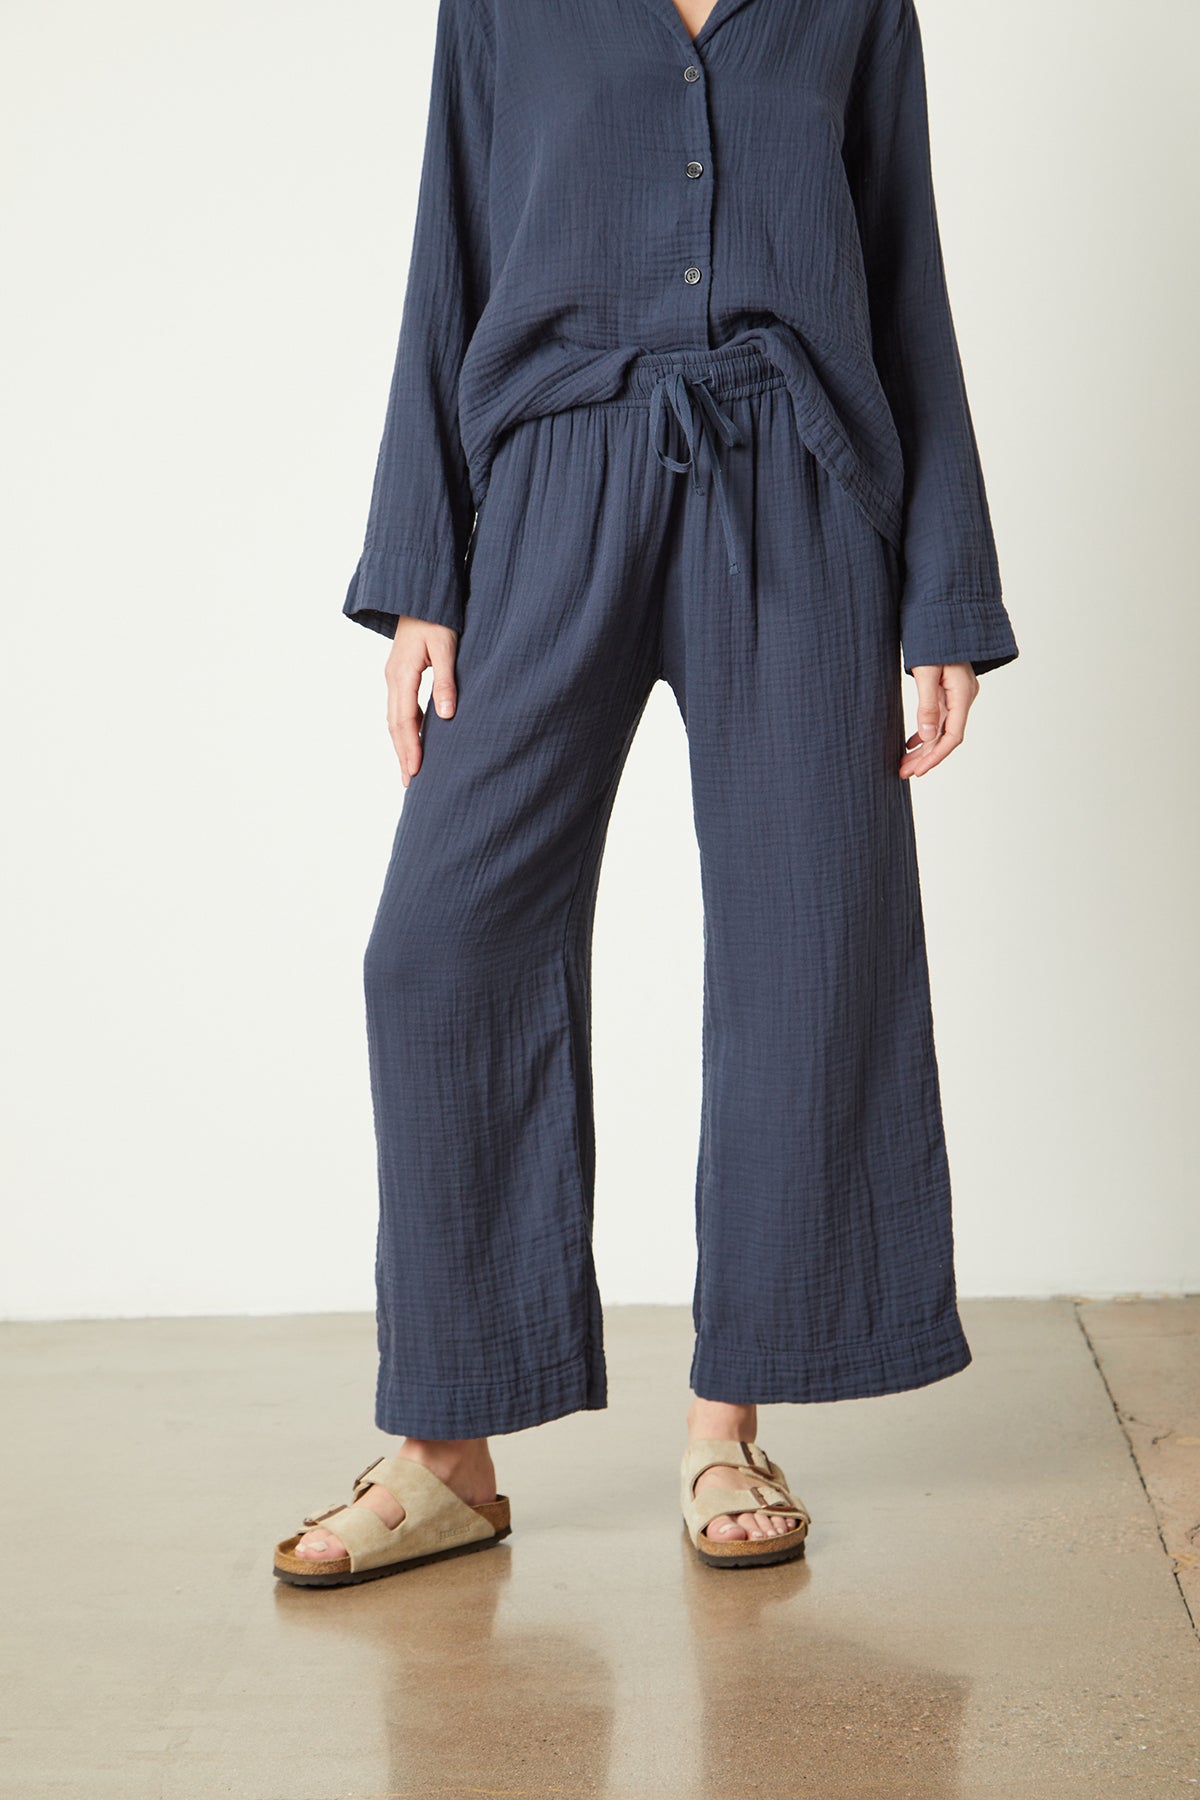 The model is wearing a navy linen PAJAMA PANT and Jenny Graham Home sandals.-25519563243713